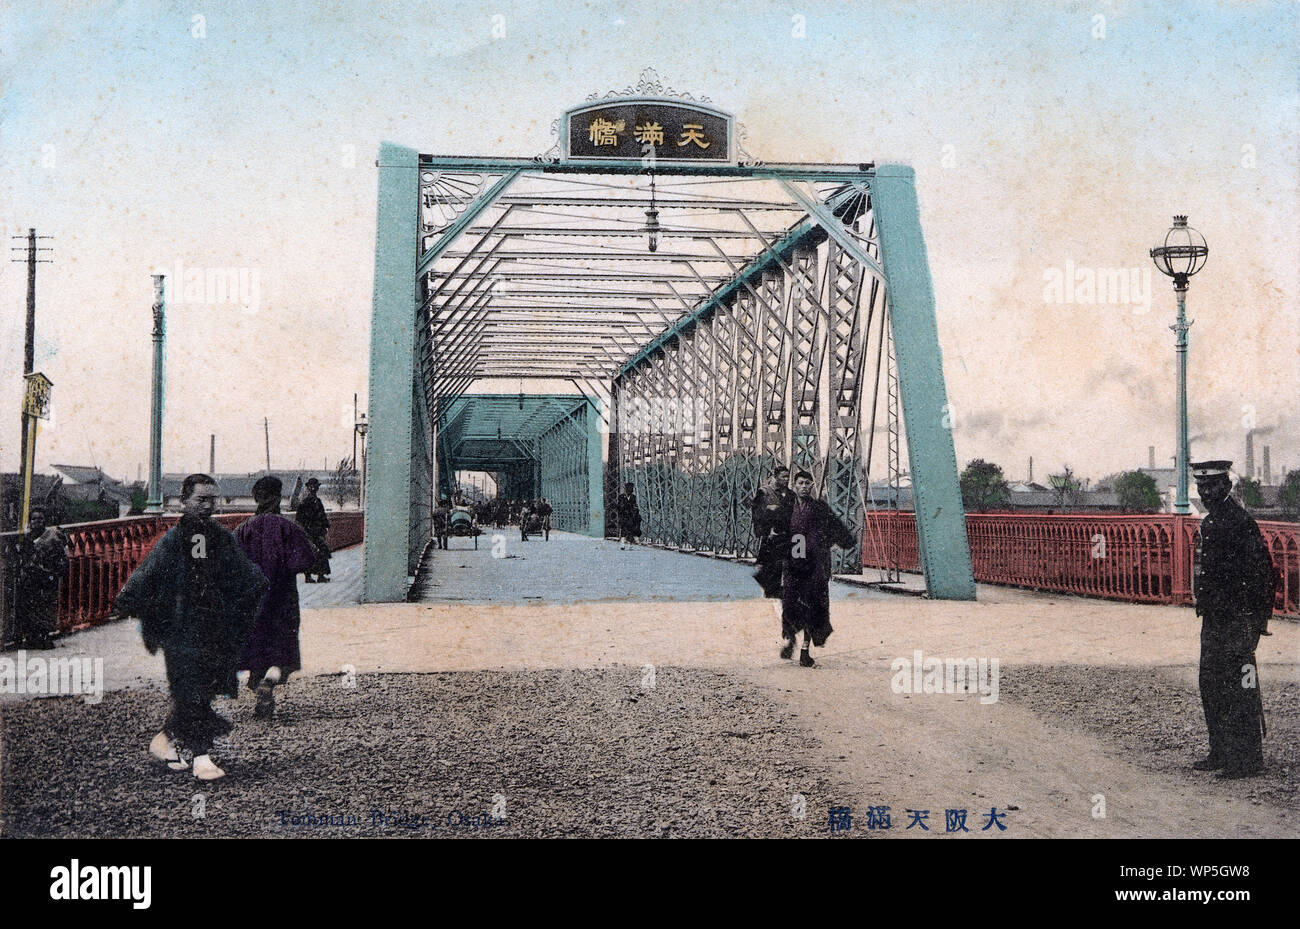 [ 1910s Japan - 70219-0002 - Tenmabashi Steel Bridge in Osaka ] —   Temmabashi Bridge, Osaka.  The bridge was, together with Tenjinbashi and Naniwabashi, considered to be one of the Three Large Bridges of Naniwa (浪華の三大橋). Naniwa is the historical name for Osaka.  The original wooden bridge was washed away by floods in July, 1885 (Meiji 18) and replaced by the steel bridge shown in this photograph in 1888 (Meiji 21).  In 1935 (Showa 10), this bridge was replaced. The current Tenmabashi dates from 1970 (Showa 45).  20th century vintage postcard. Stock Photo